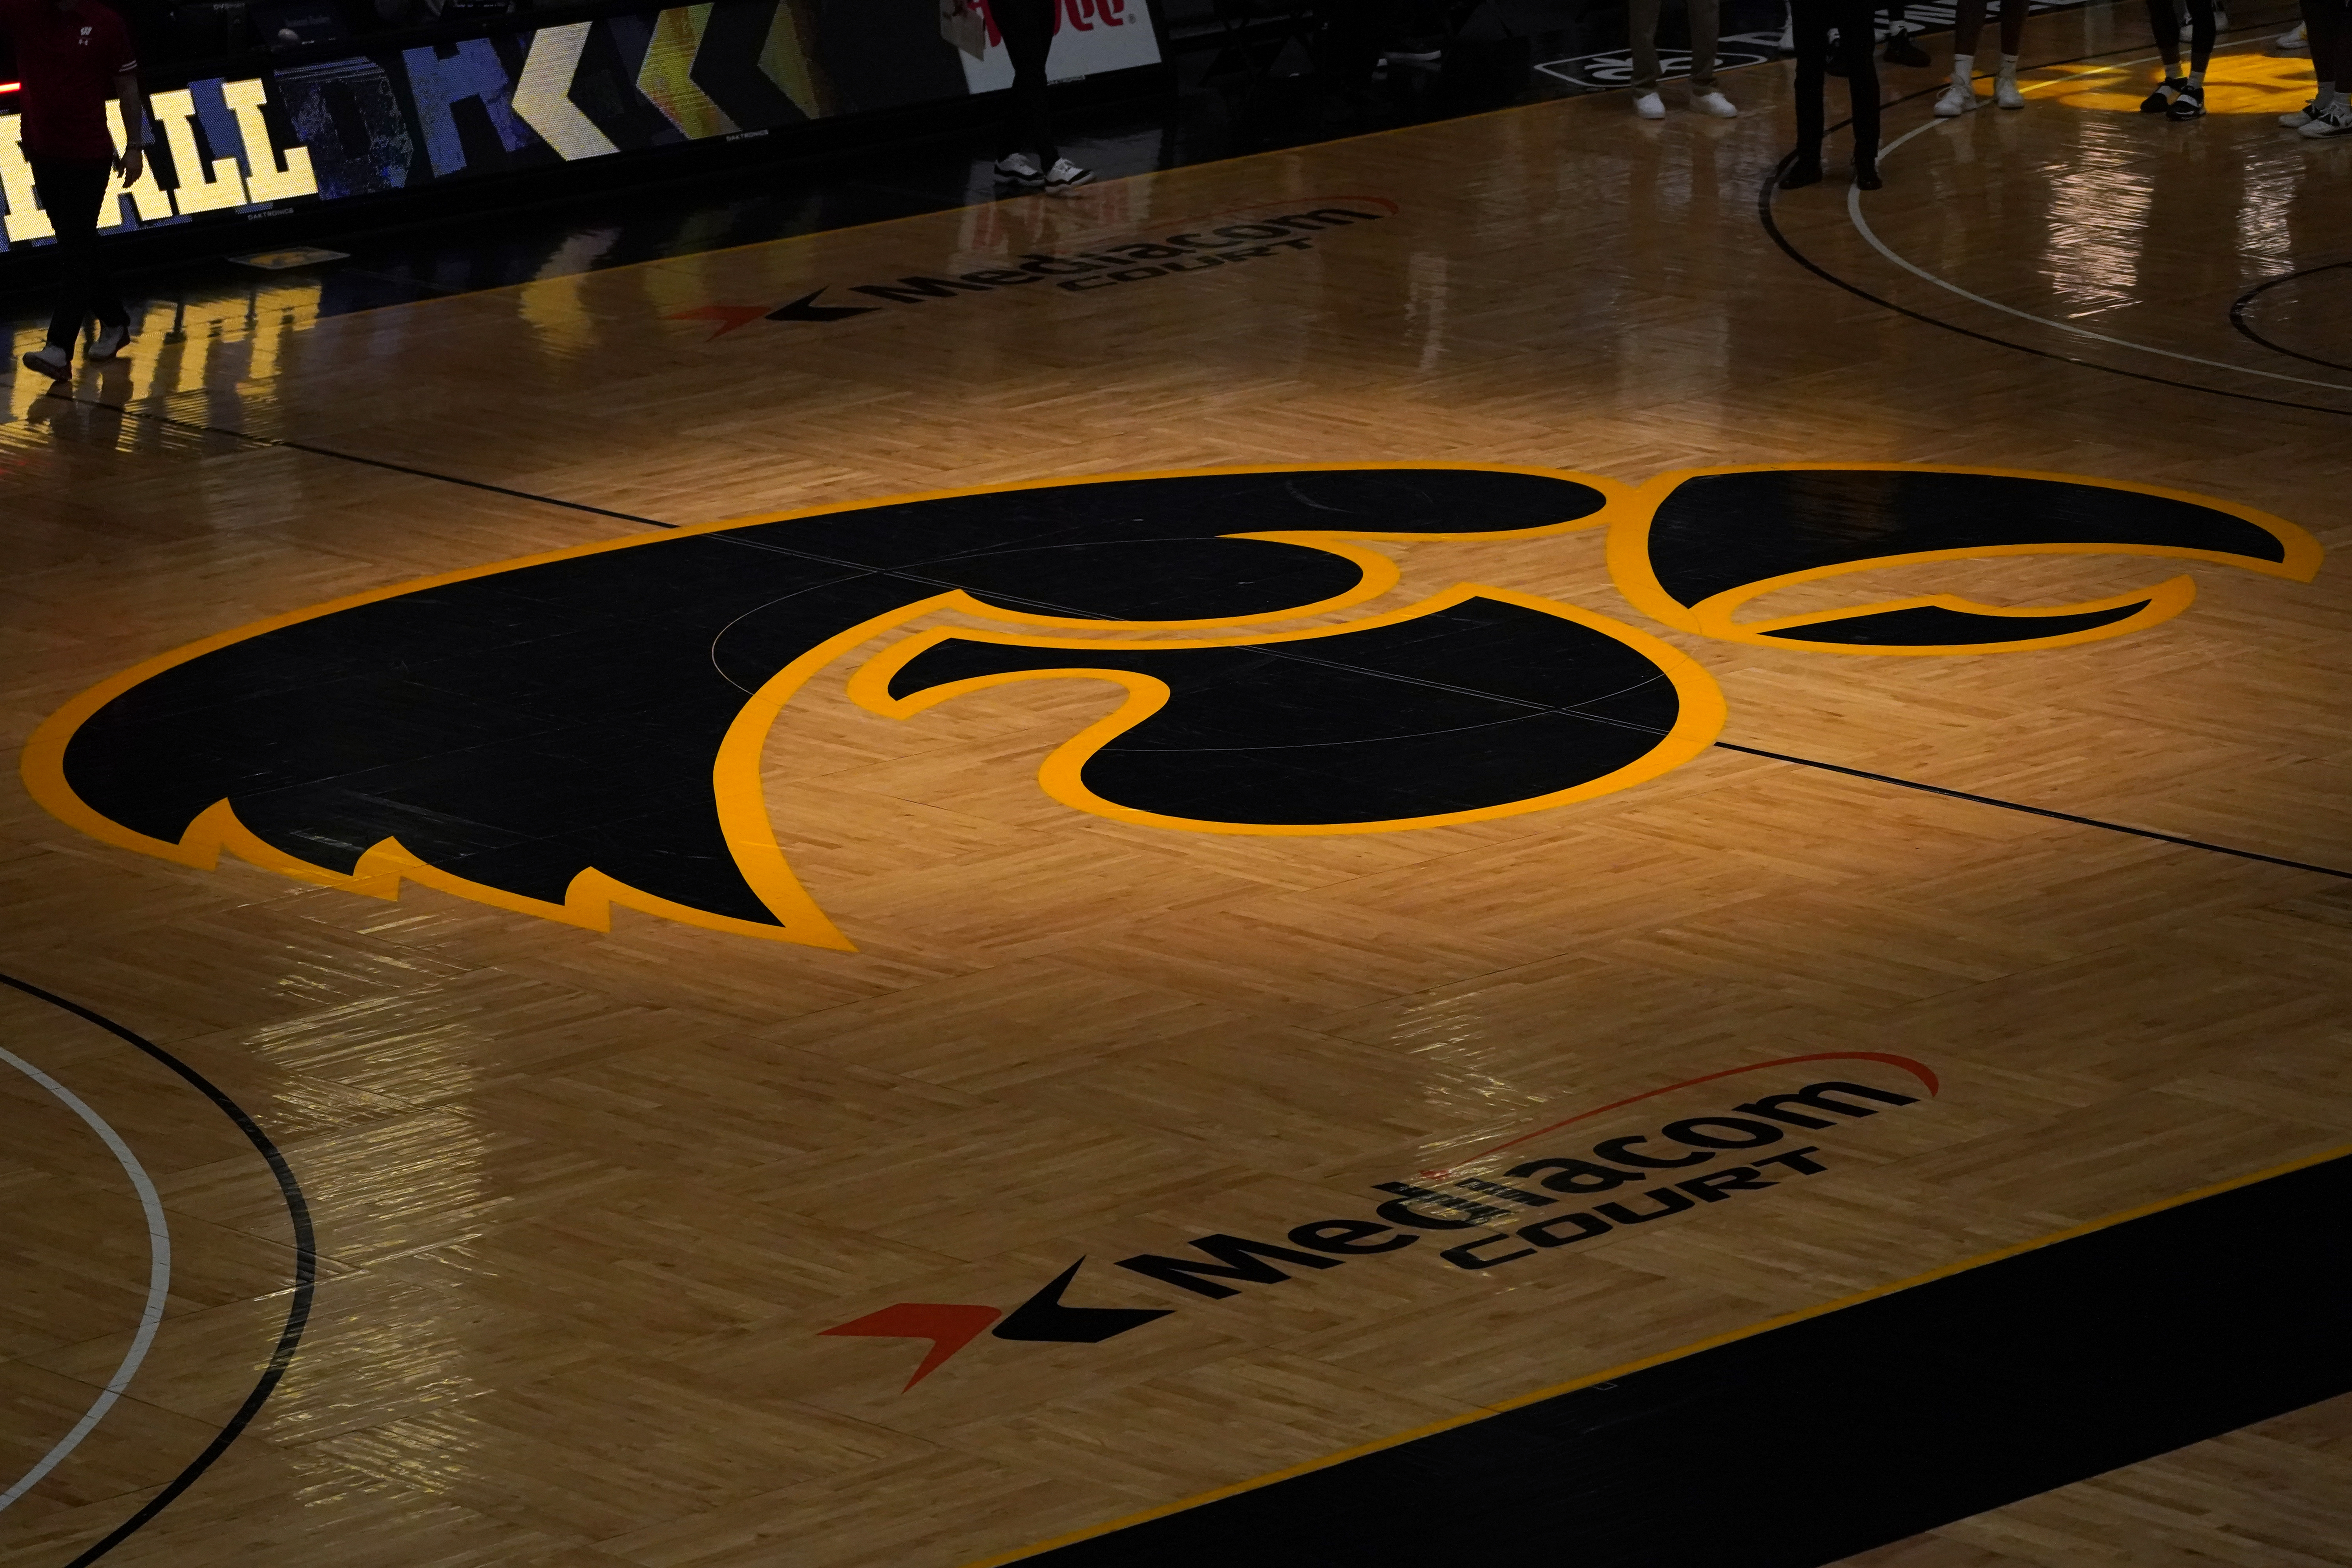 Free watch party for NCAA championship game planned at Carver-Hawkeye Arena